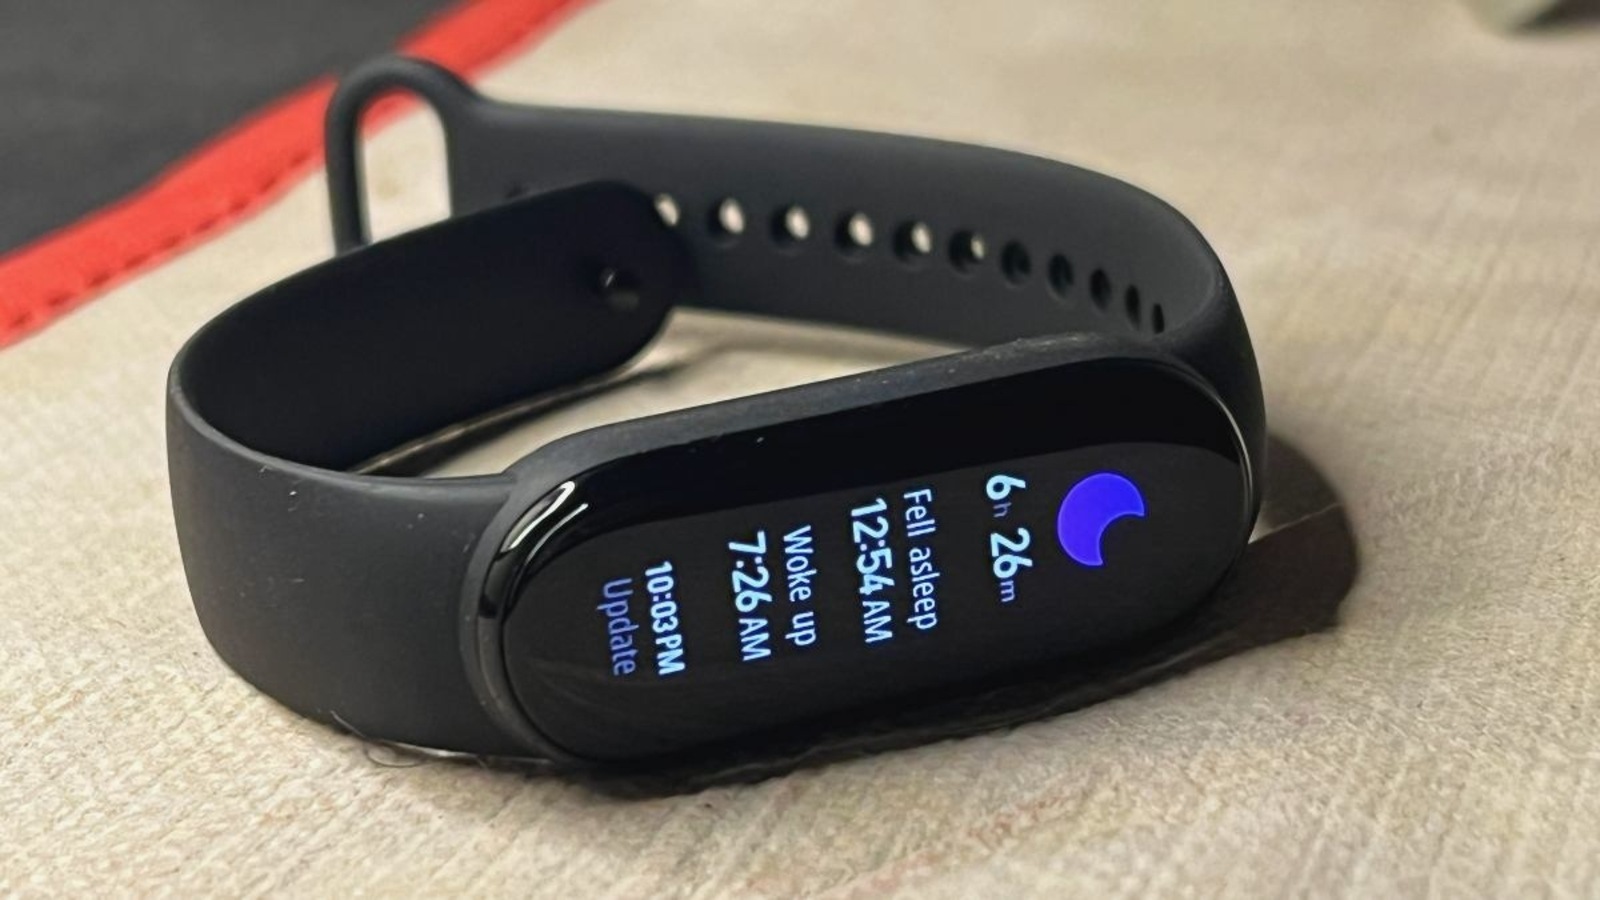 Xiaomi Smart Band 7 Pro review: This oversized Mi Band 7 has a few